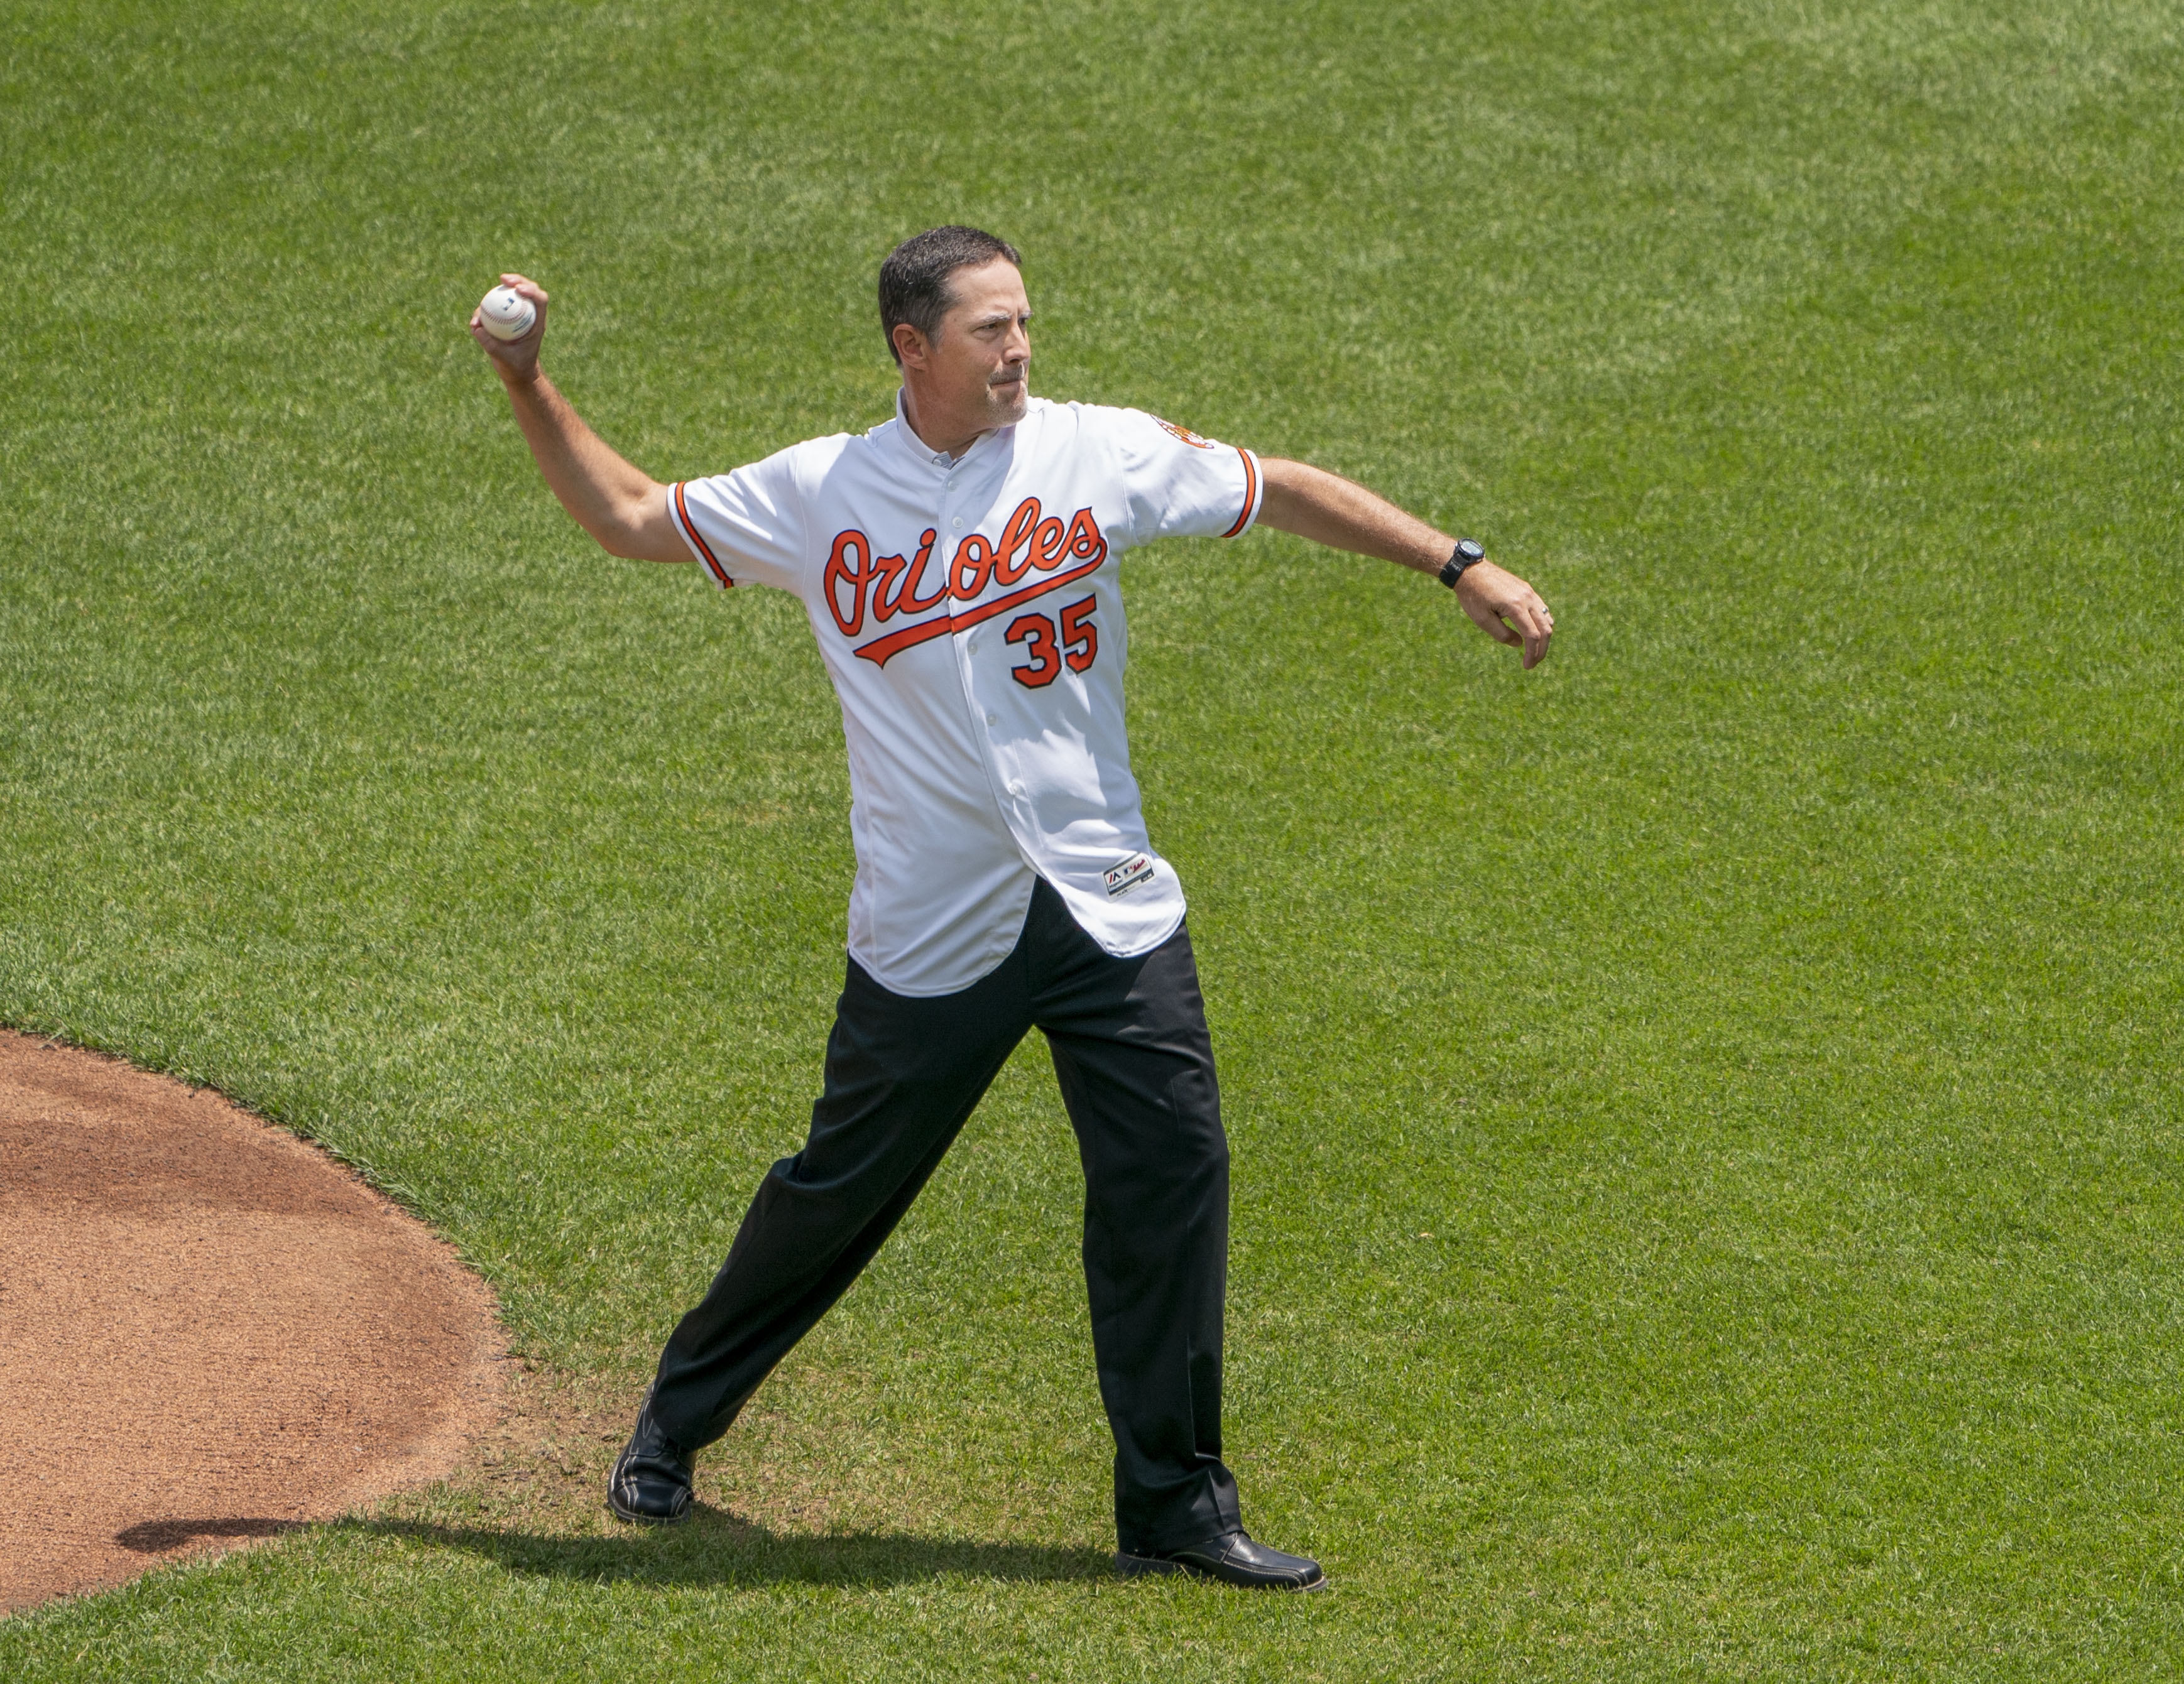 Baltimore Orioles: Mike Mussina's Top Five Starts As An Oriole